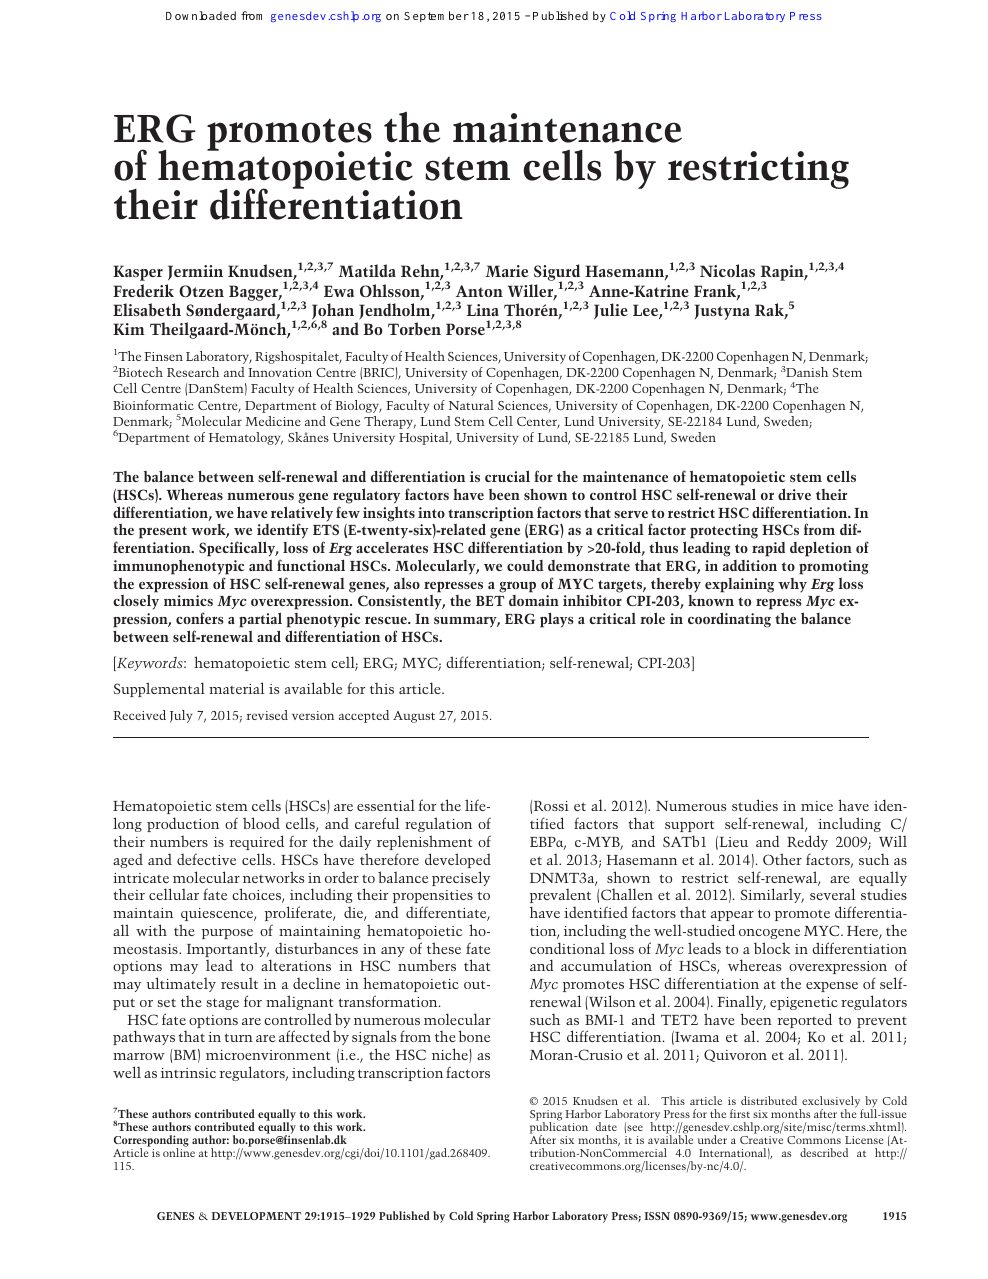 Erg Promotes The Maintenance Of Hematopoietic Stem Cells By Restricting Their Differentiation Topic Of Research Paper In Biological Sciences Download Scholarly Article Pdf And Read For Free On Cyberleninka Open Science